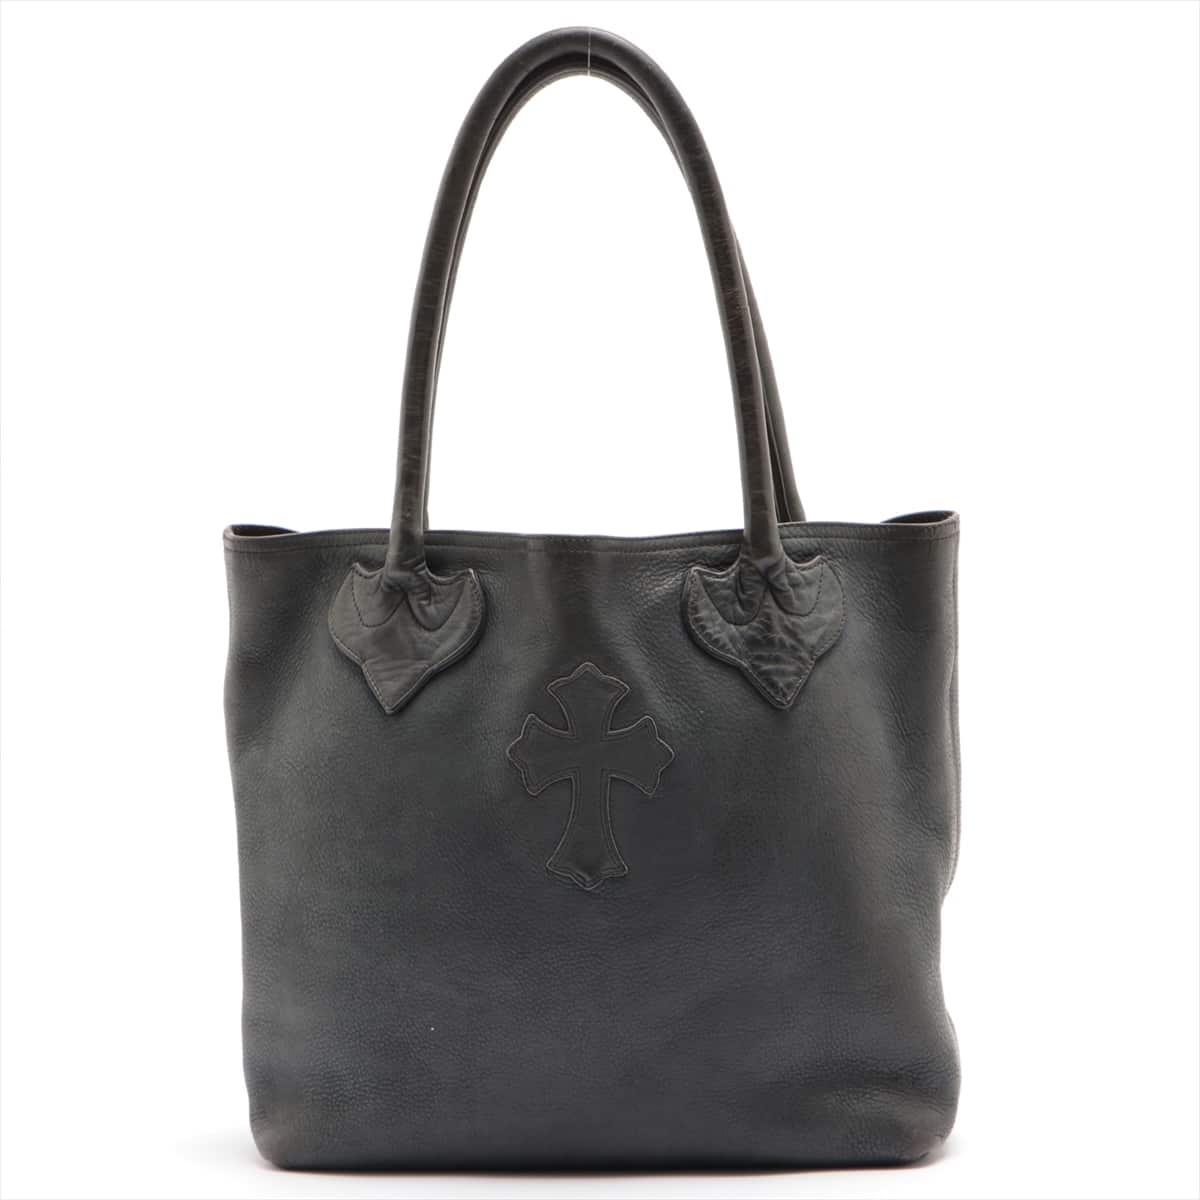 Chrome Hearts FS Tote bag Leather Grey Cracked handle